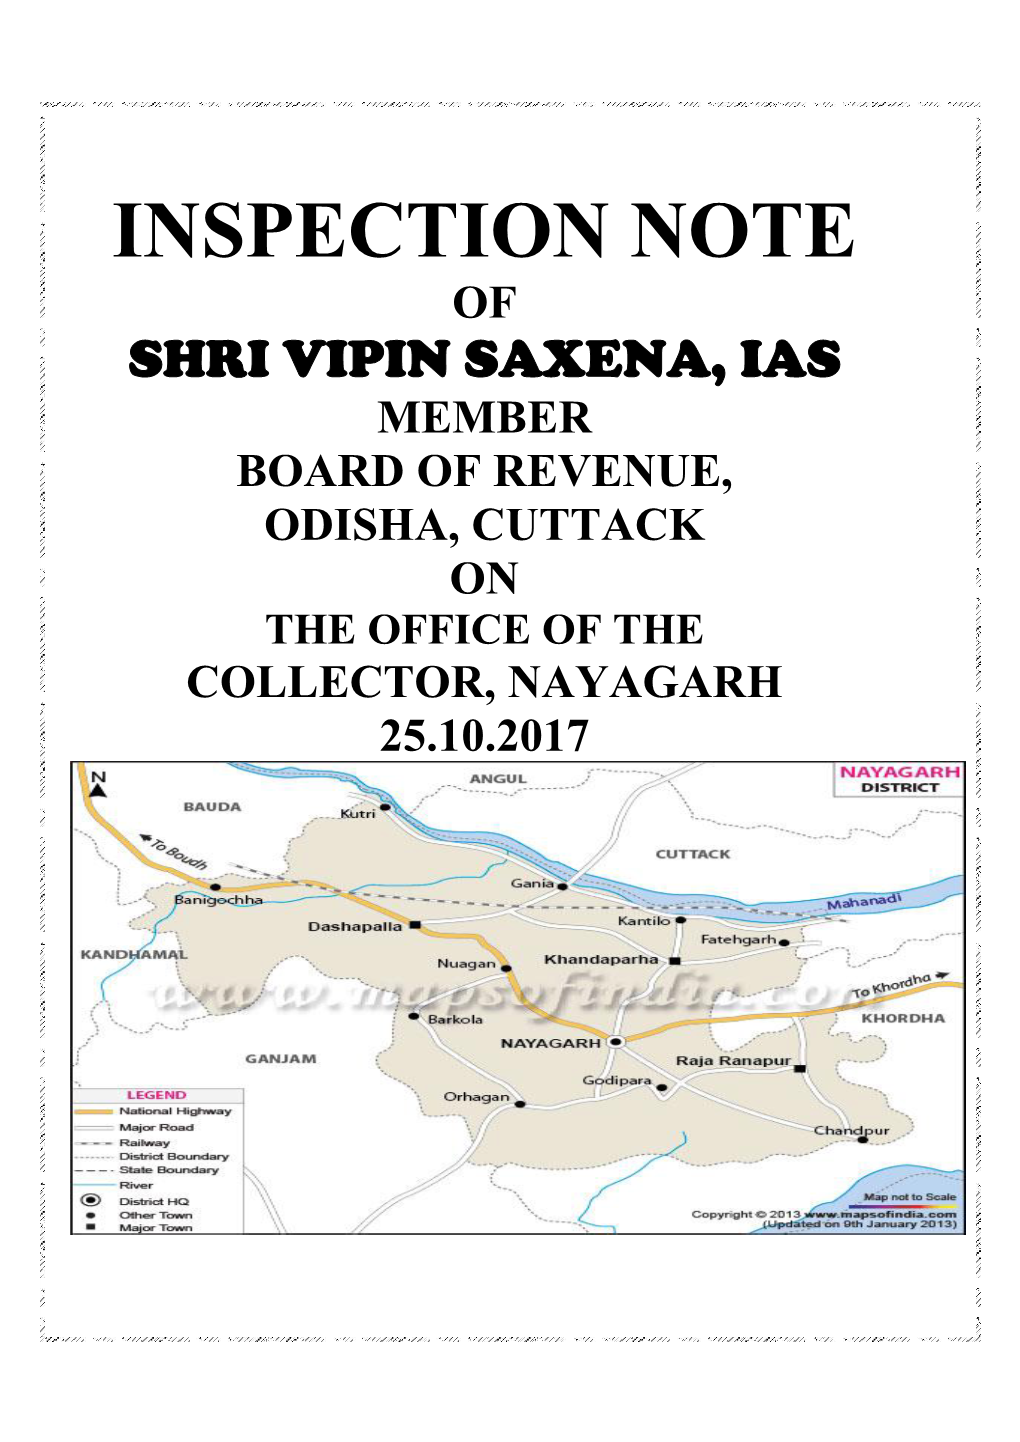 Inspection Note on Collectorate,Nayagarh on 25-10-2017